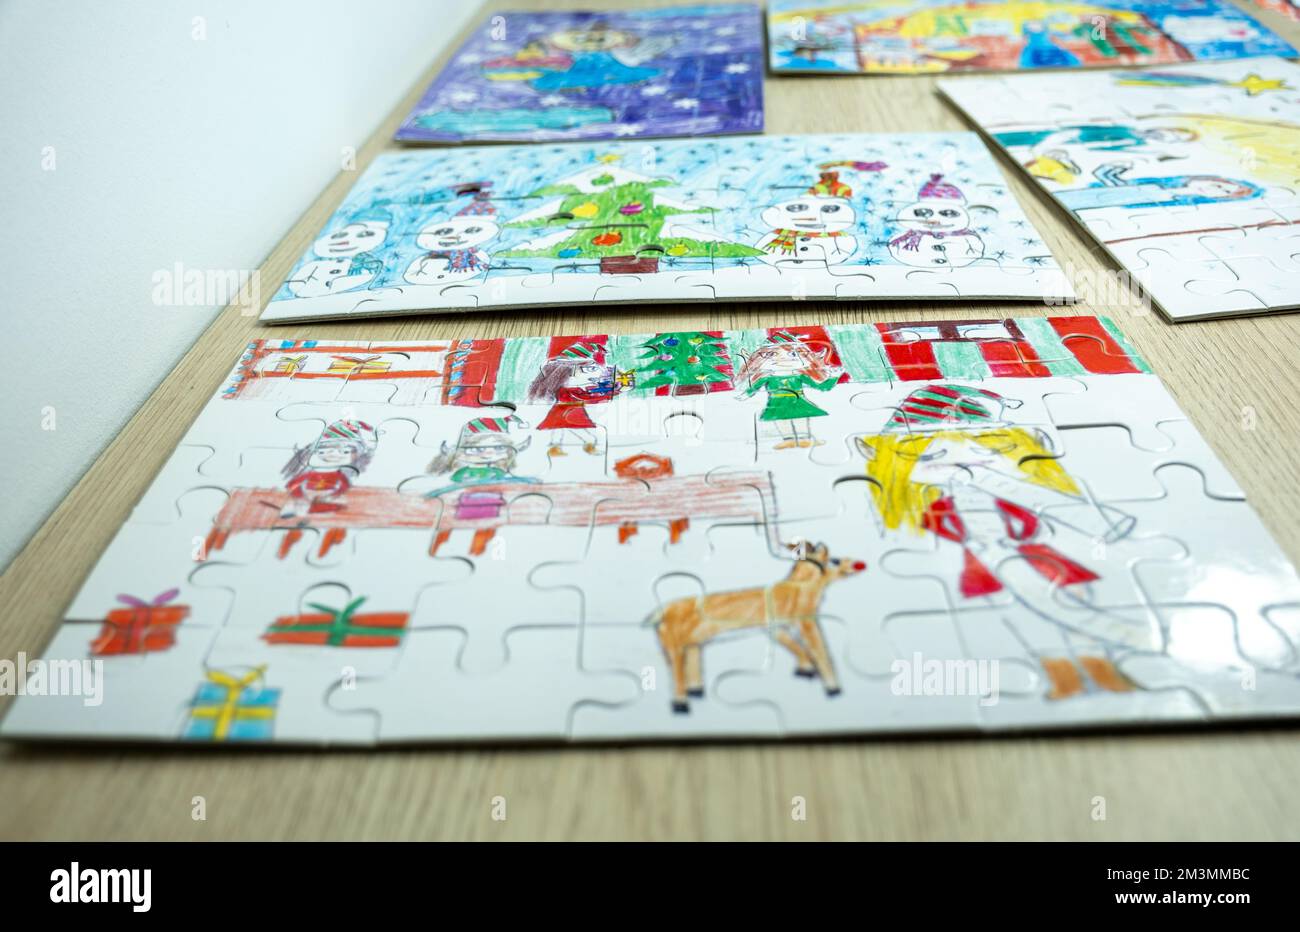 Elves are preparing gifts and a snowman - sublimation puzzle Stock Photo